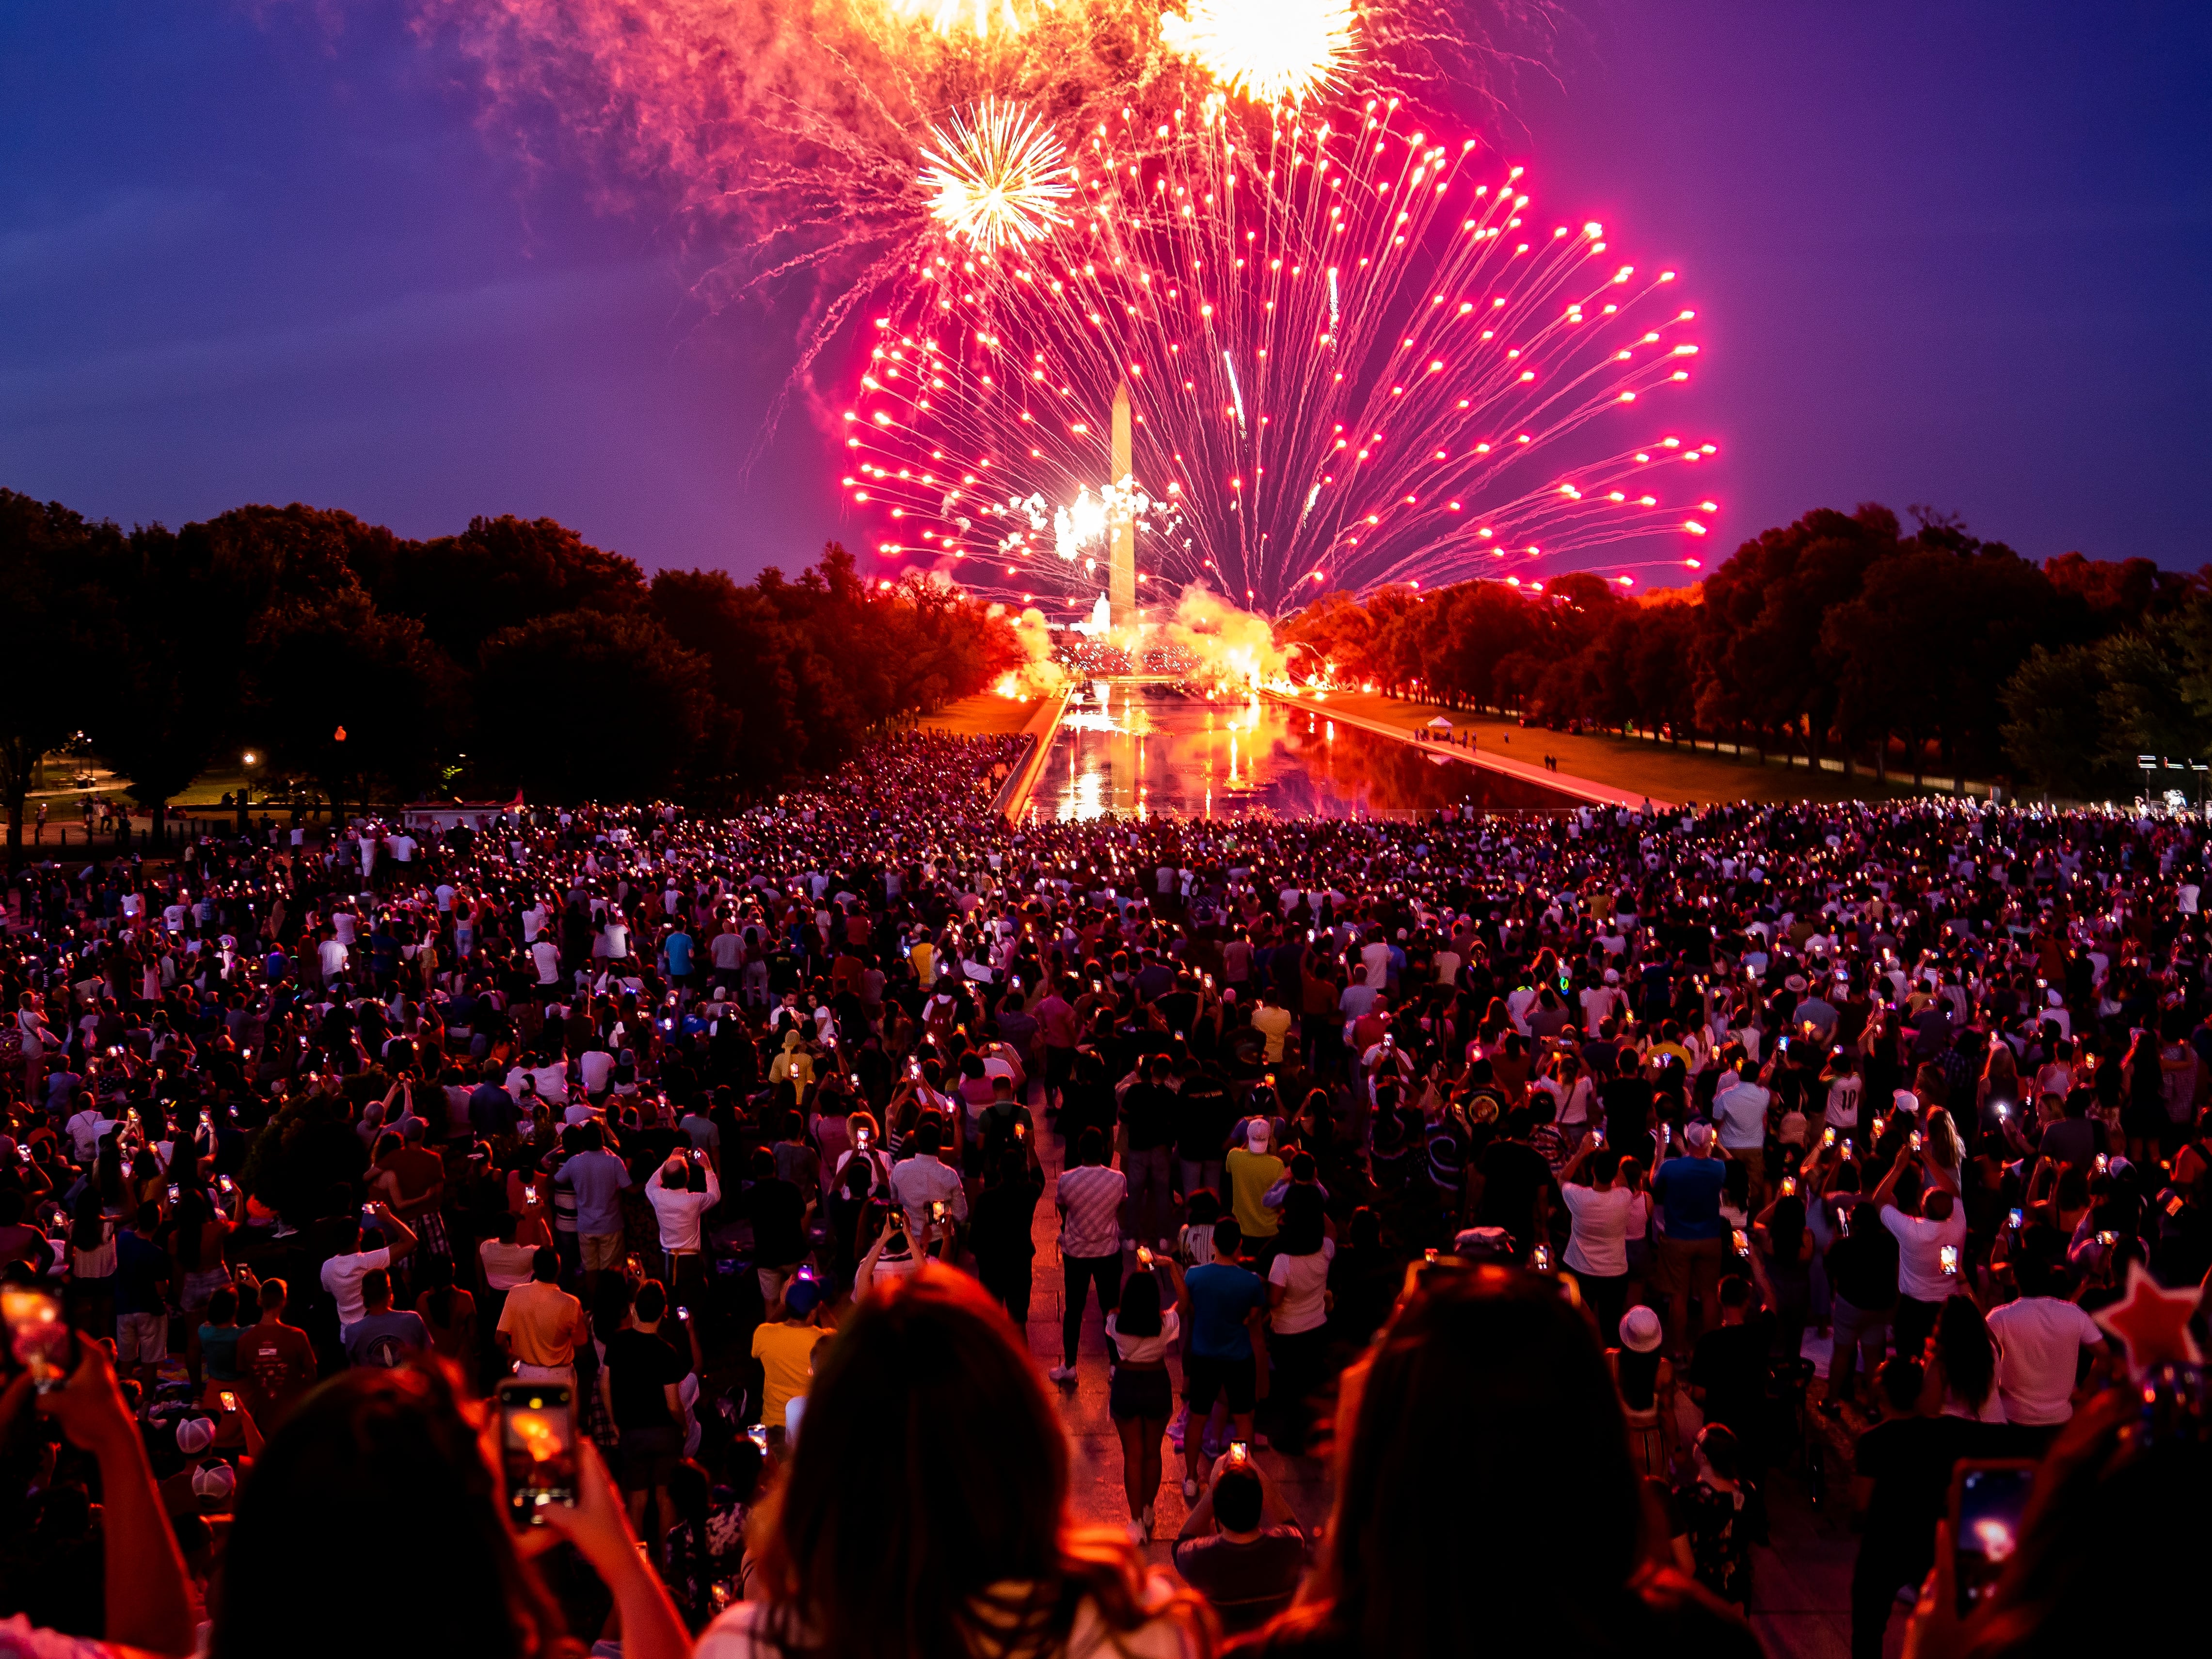 Spectators watch as fireworks erupt over the Washington Monument on July 4, 2022, in Washington, D.C.